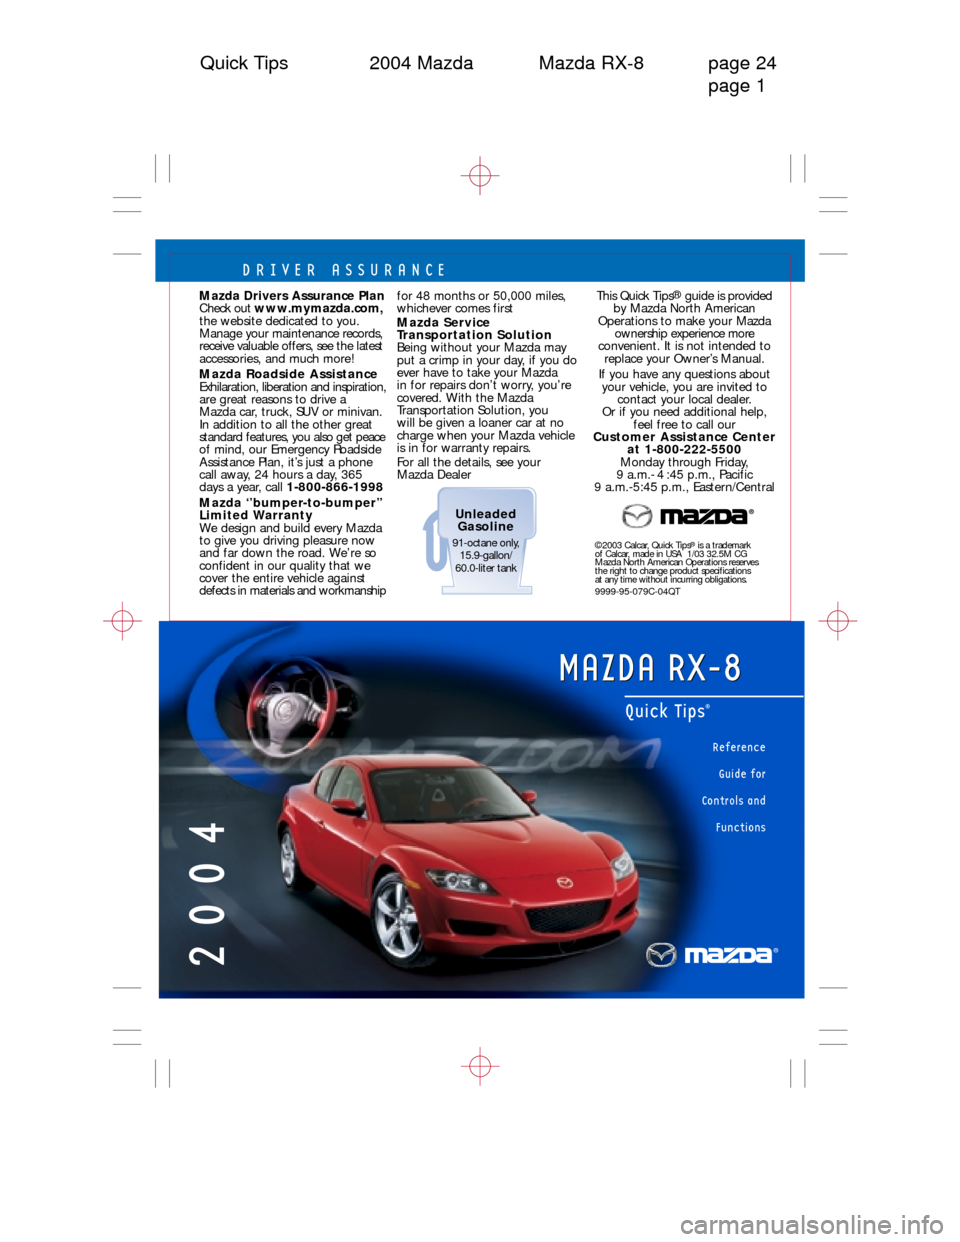 MAZDA MODEL RX 8 2004  Quick Tips (in English) 2004
Reference
Guide for 
Controls and
Functions
Quick Tips®
®
MAZDA RX-8 MAZDA RX-8
Quick Tips 2004 Mazda Mazda RX-8 page 24
page 1
DRIVER ASSURANCE
©2003 Calcar, Quick Tips®is a trademark 
of Ca